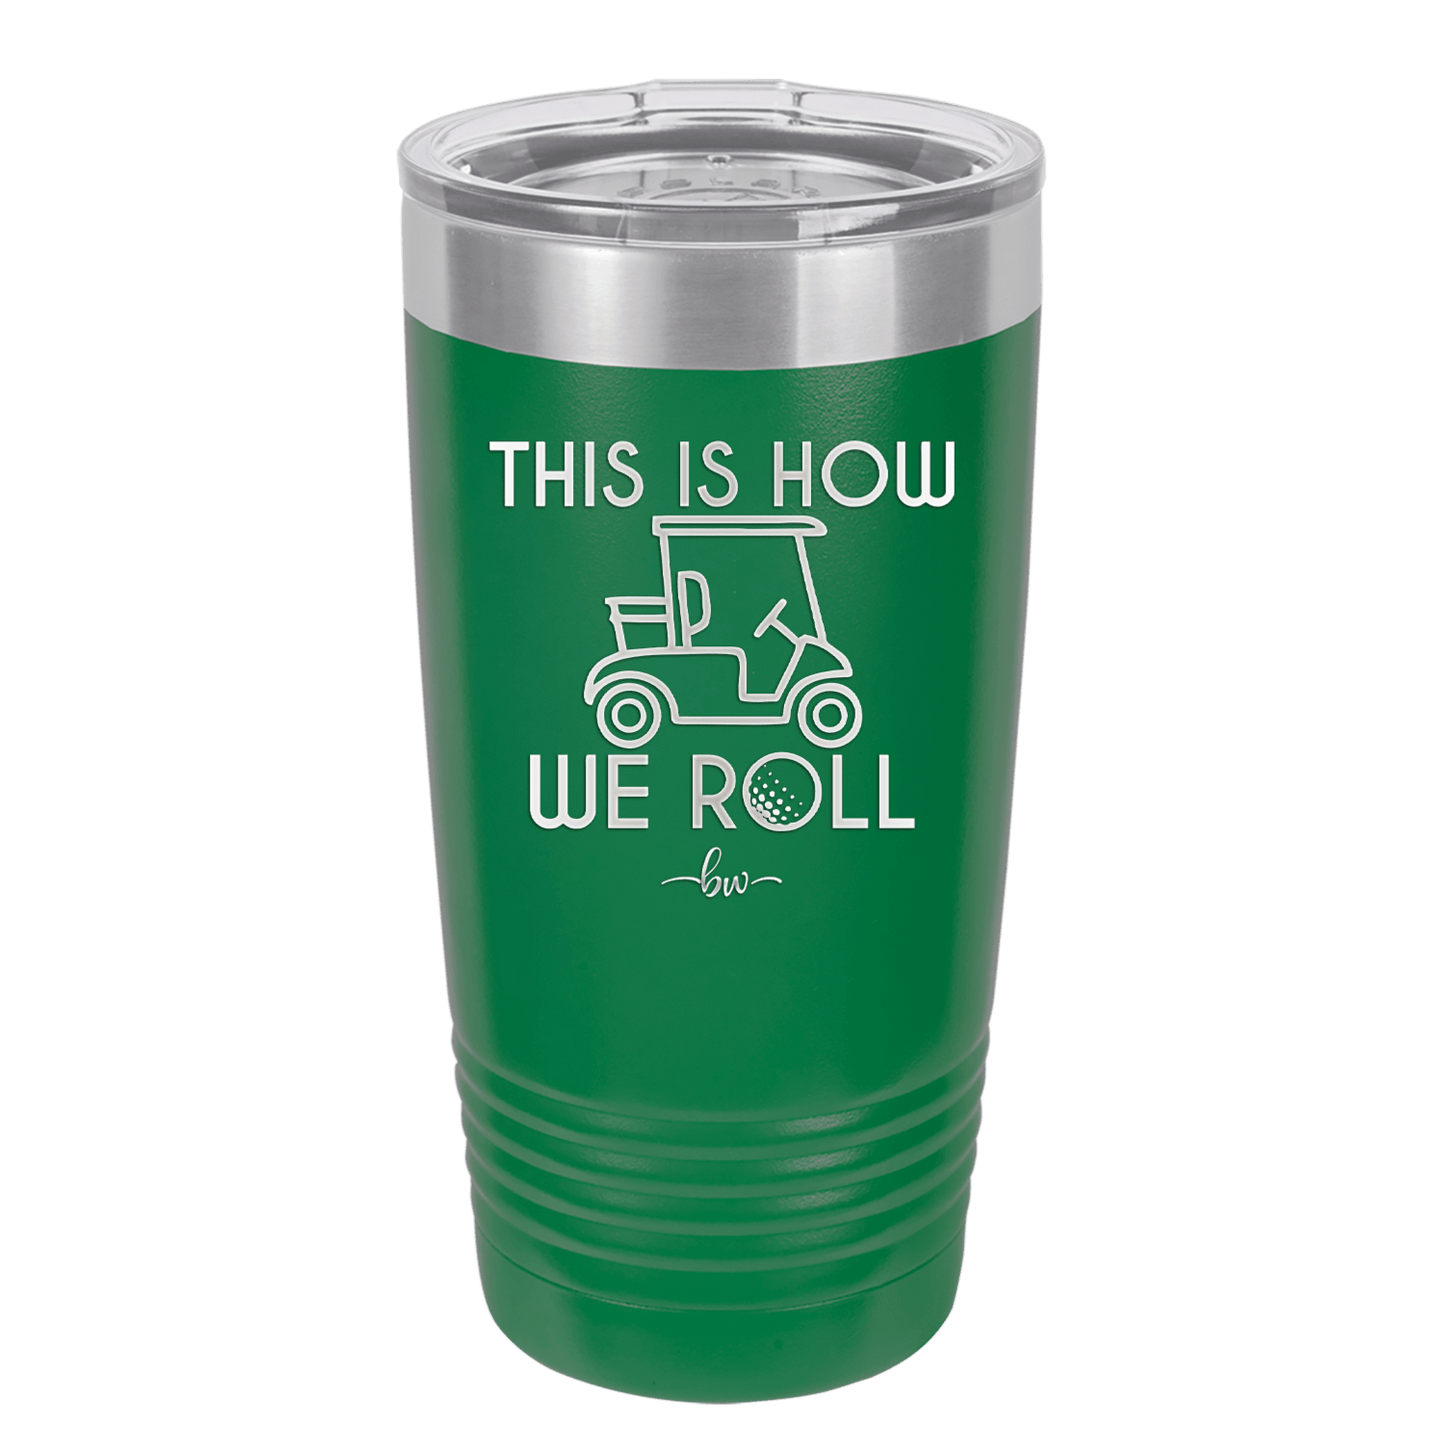 This is How We Roll Golf Cart 2 - Laser Engraved Stainless Steel Drinkware - 1669 -